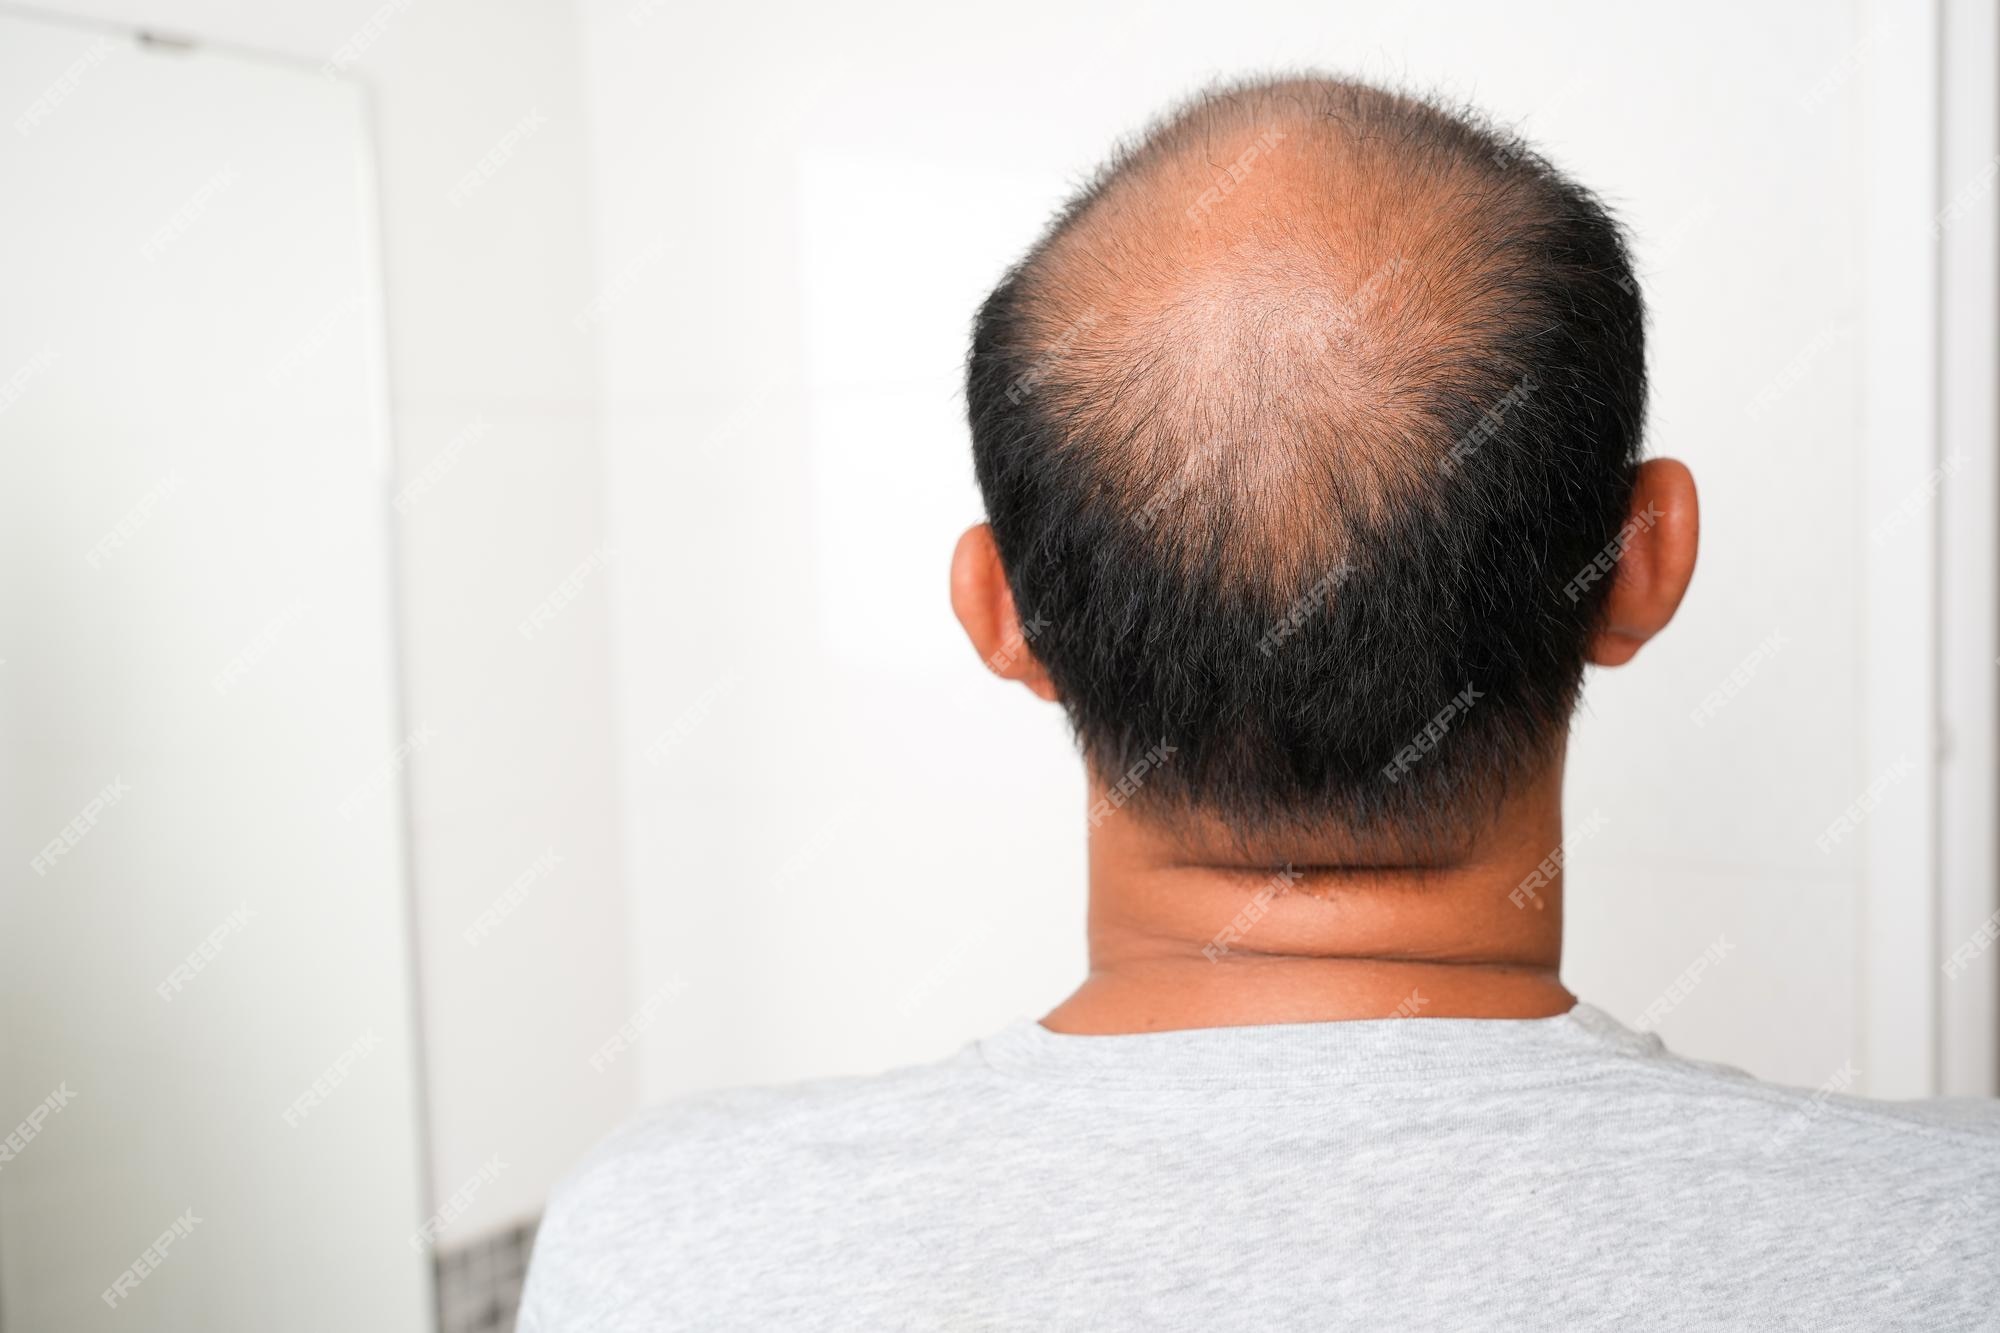 Premium Photo | Back view of bald asian male standing in bathroom